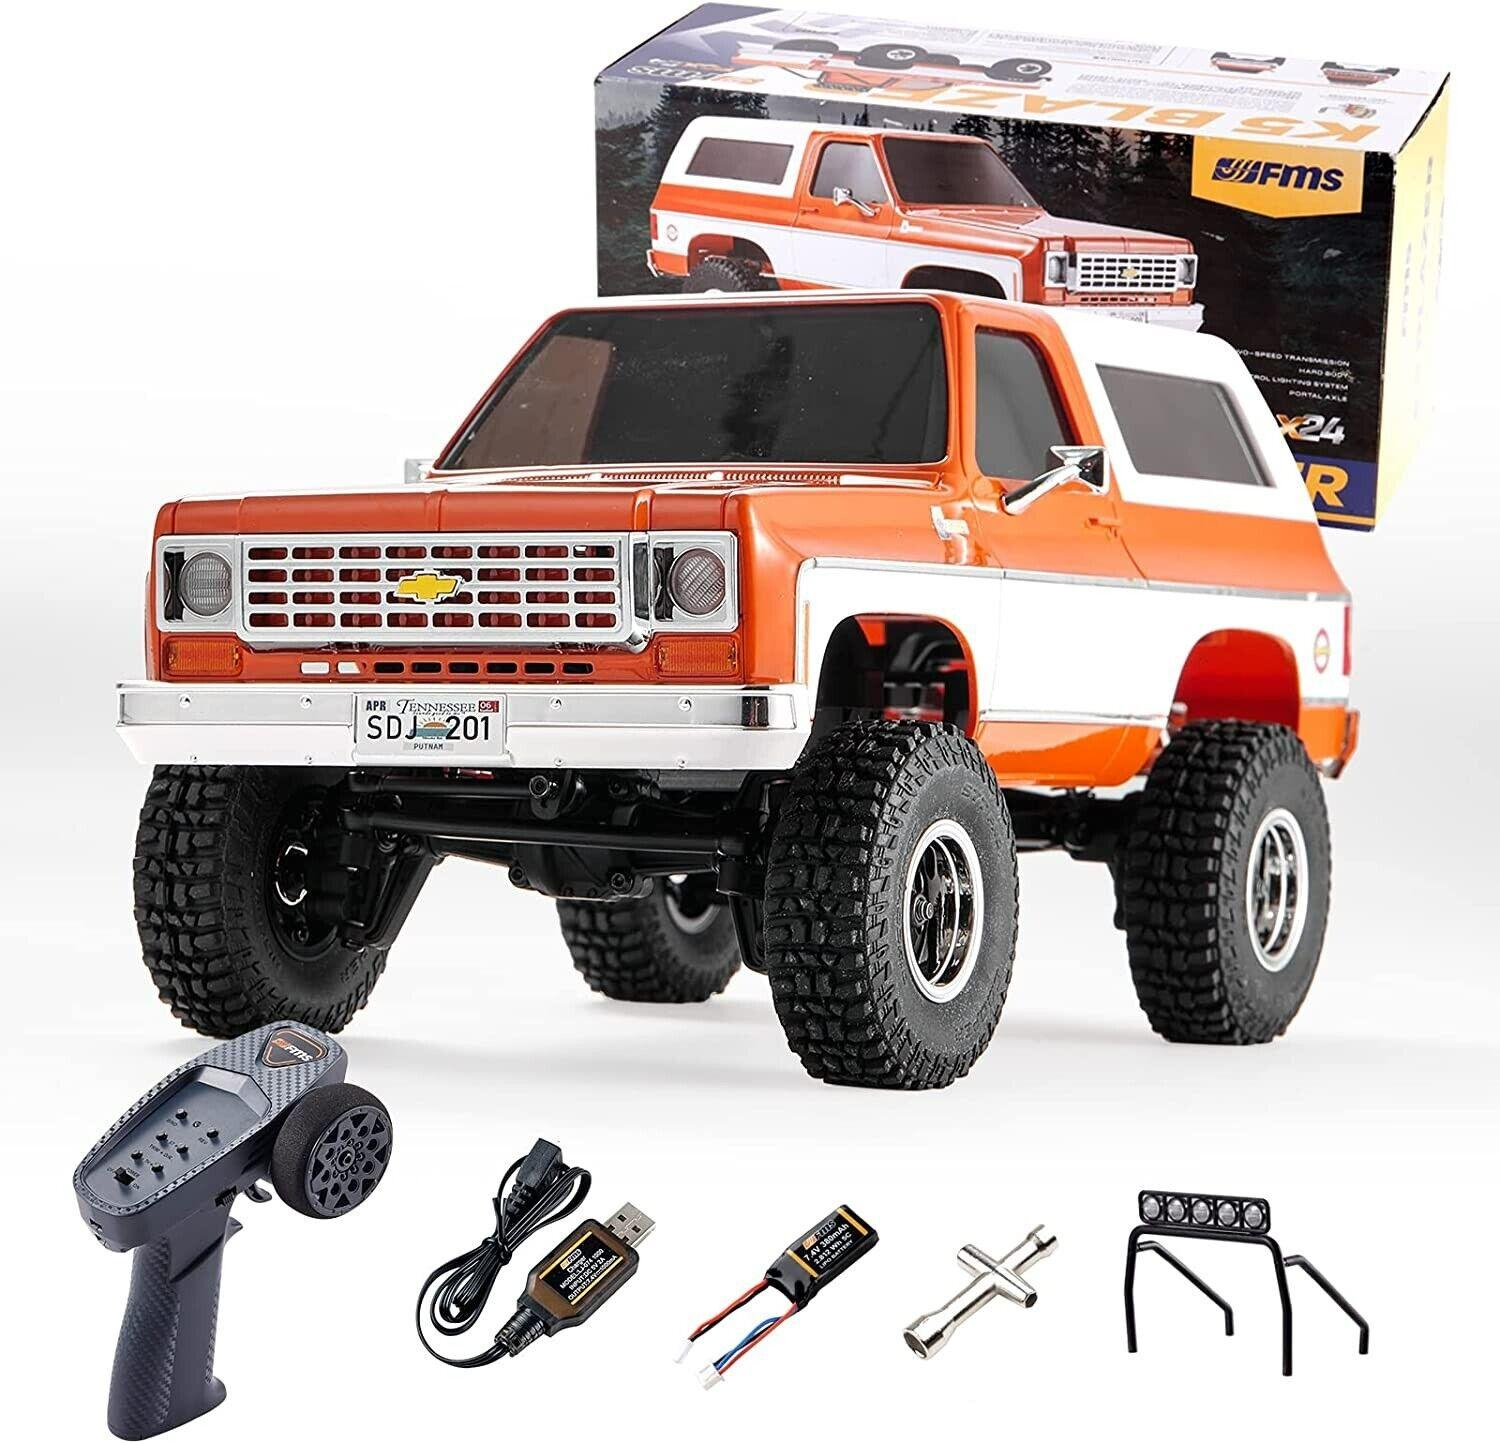 Remote Control Chevy Truck: Factors Affecting Cost of Remote Control Chevy Trucks